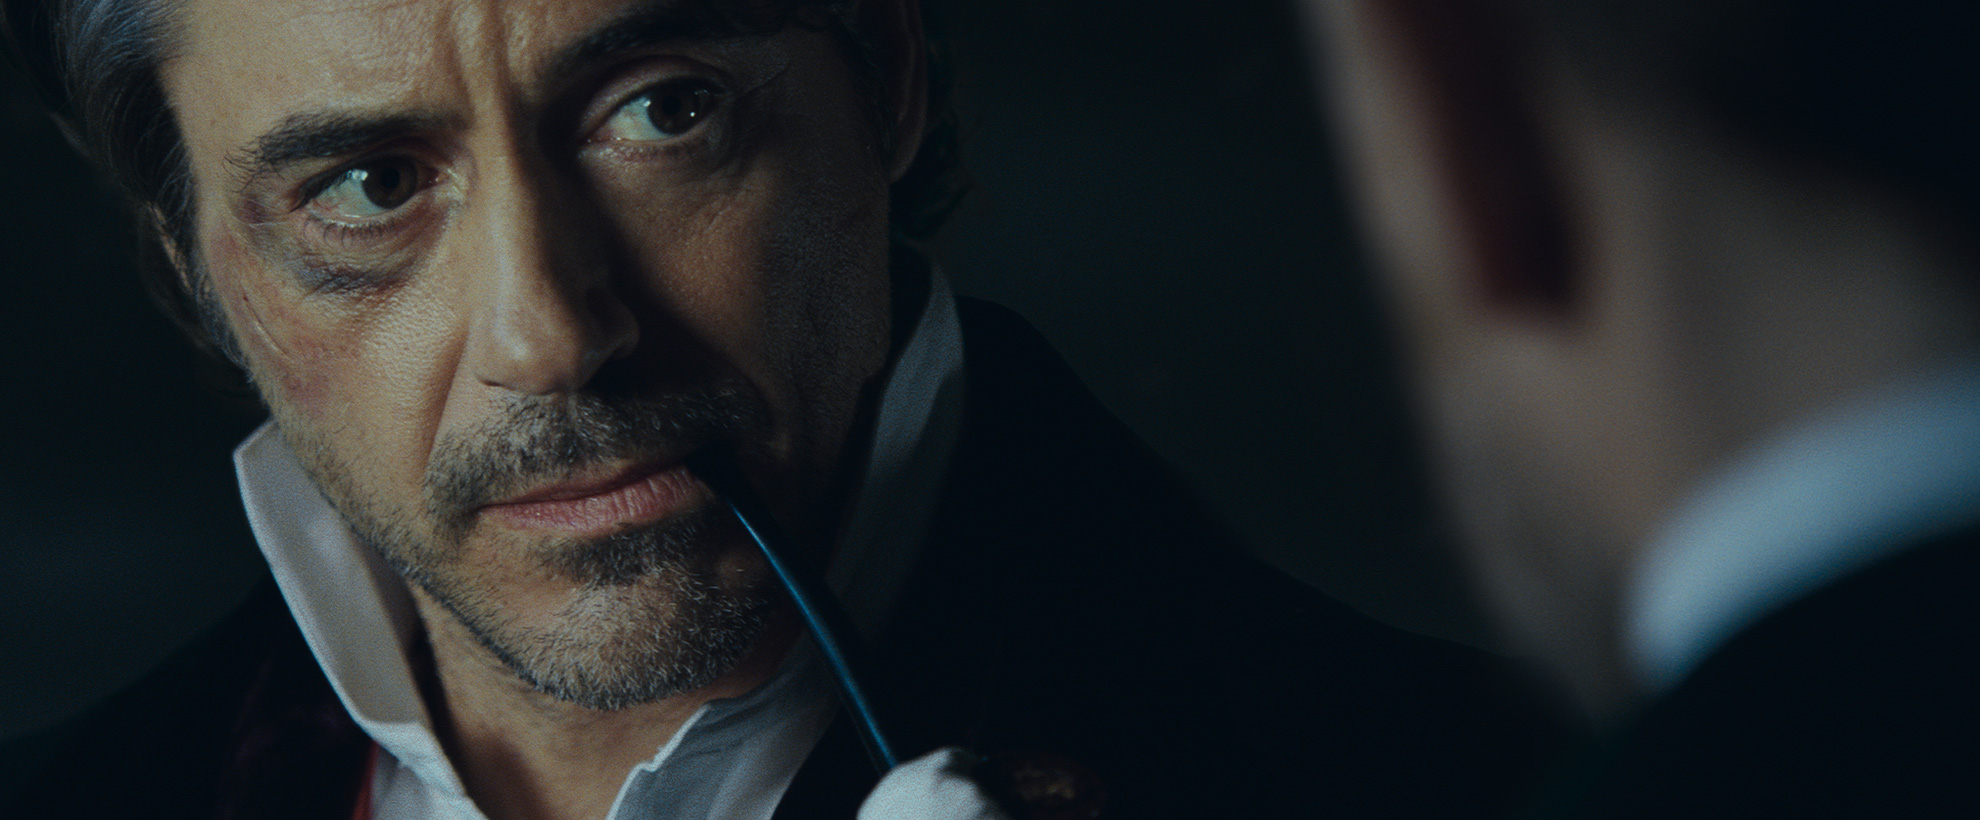 Robert Downey Junior as Sherlock Holmes, with a black eye and a pipe in his mouth